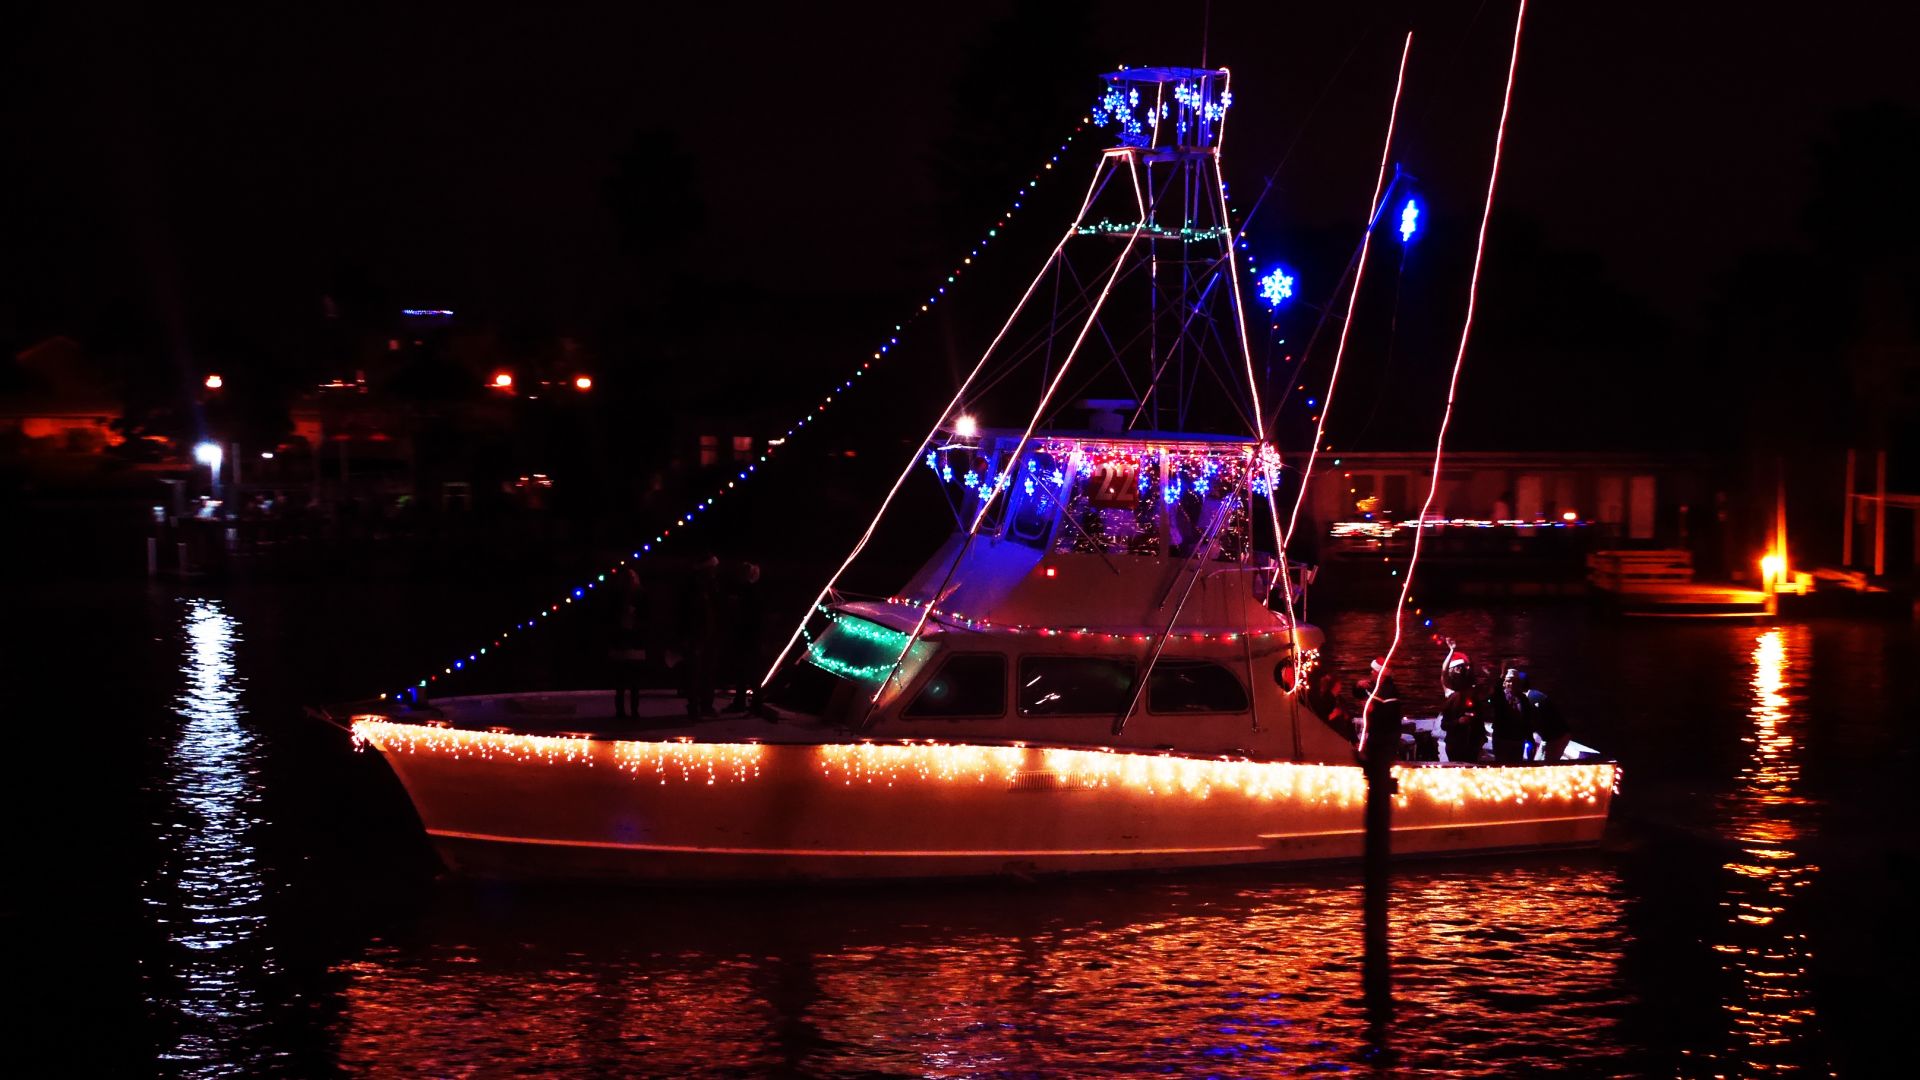 A Boat With Lights On It